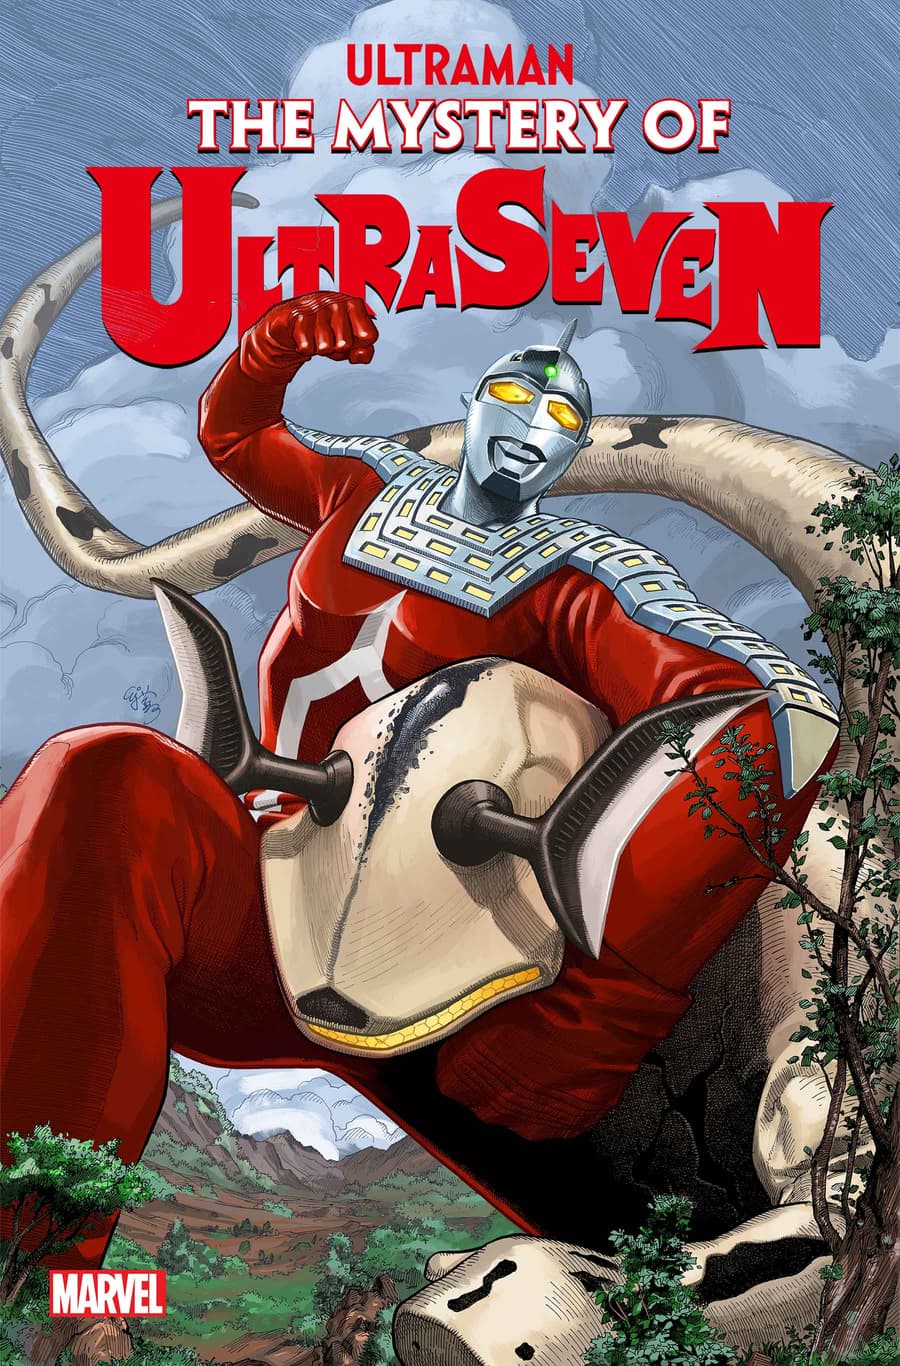 ULTRAMAN: THE MYSTERY OF ULTRASEVEN #1 cover by E.J. Su